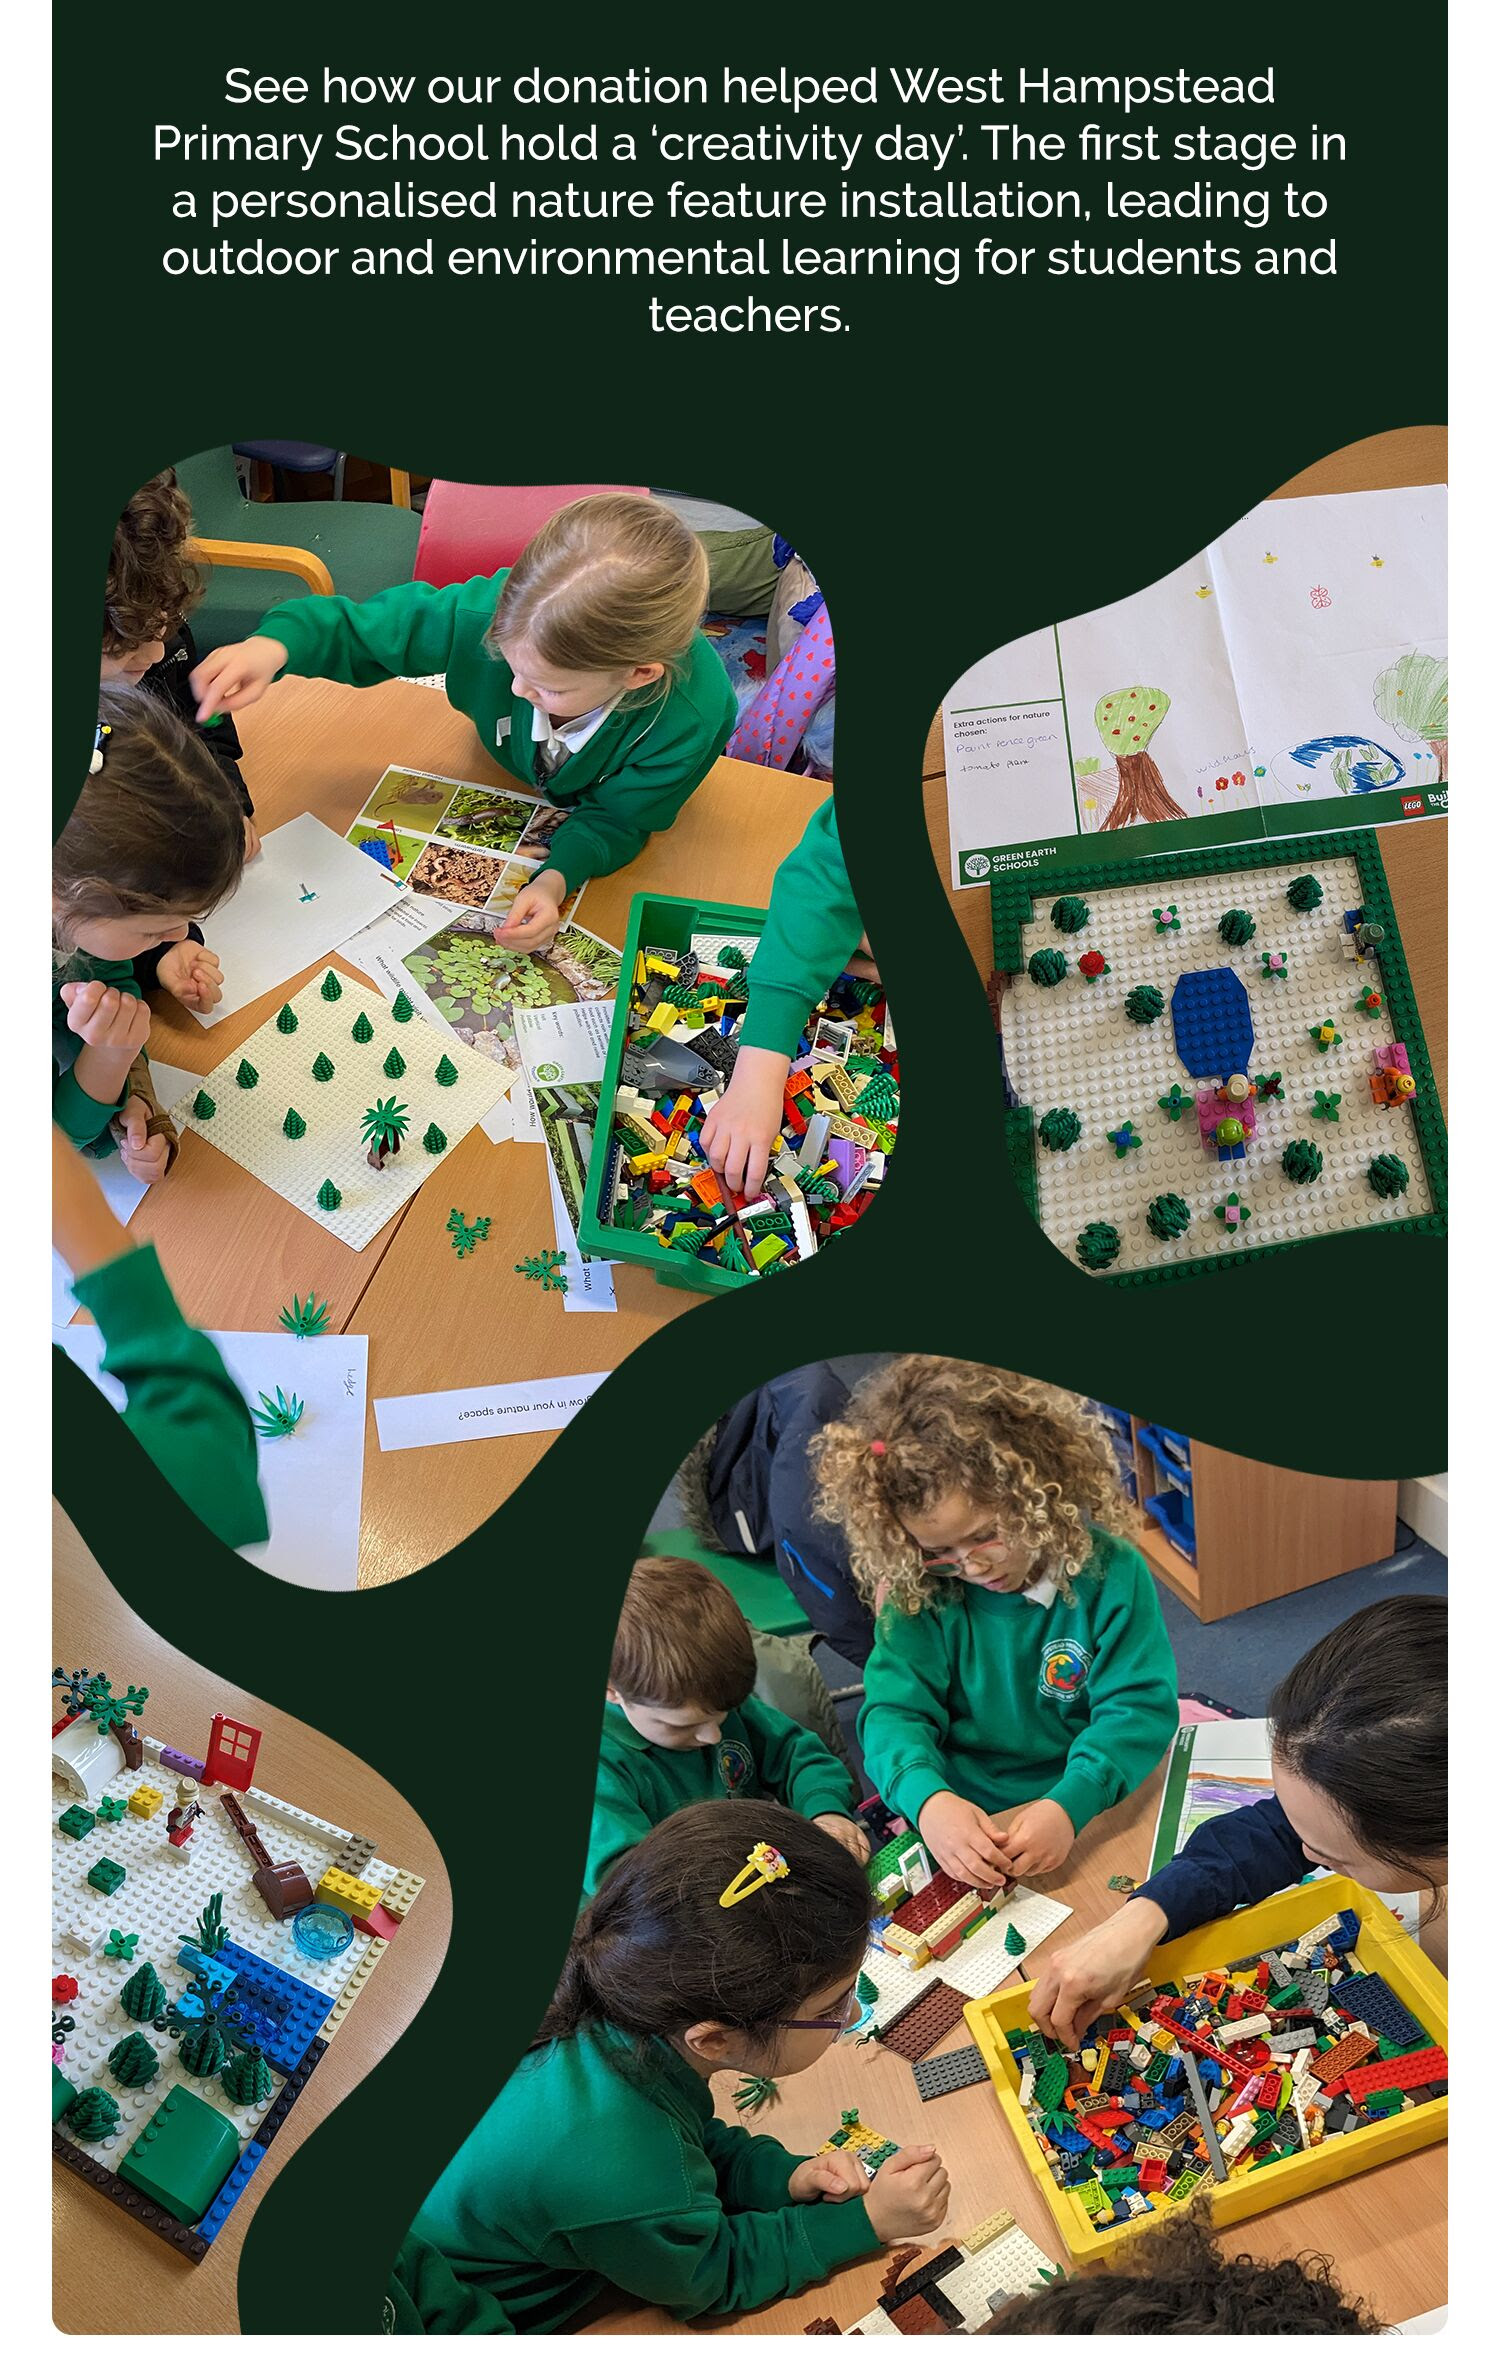 Images from West Hampstead Primary School 'Creativity Day'